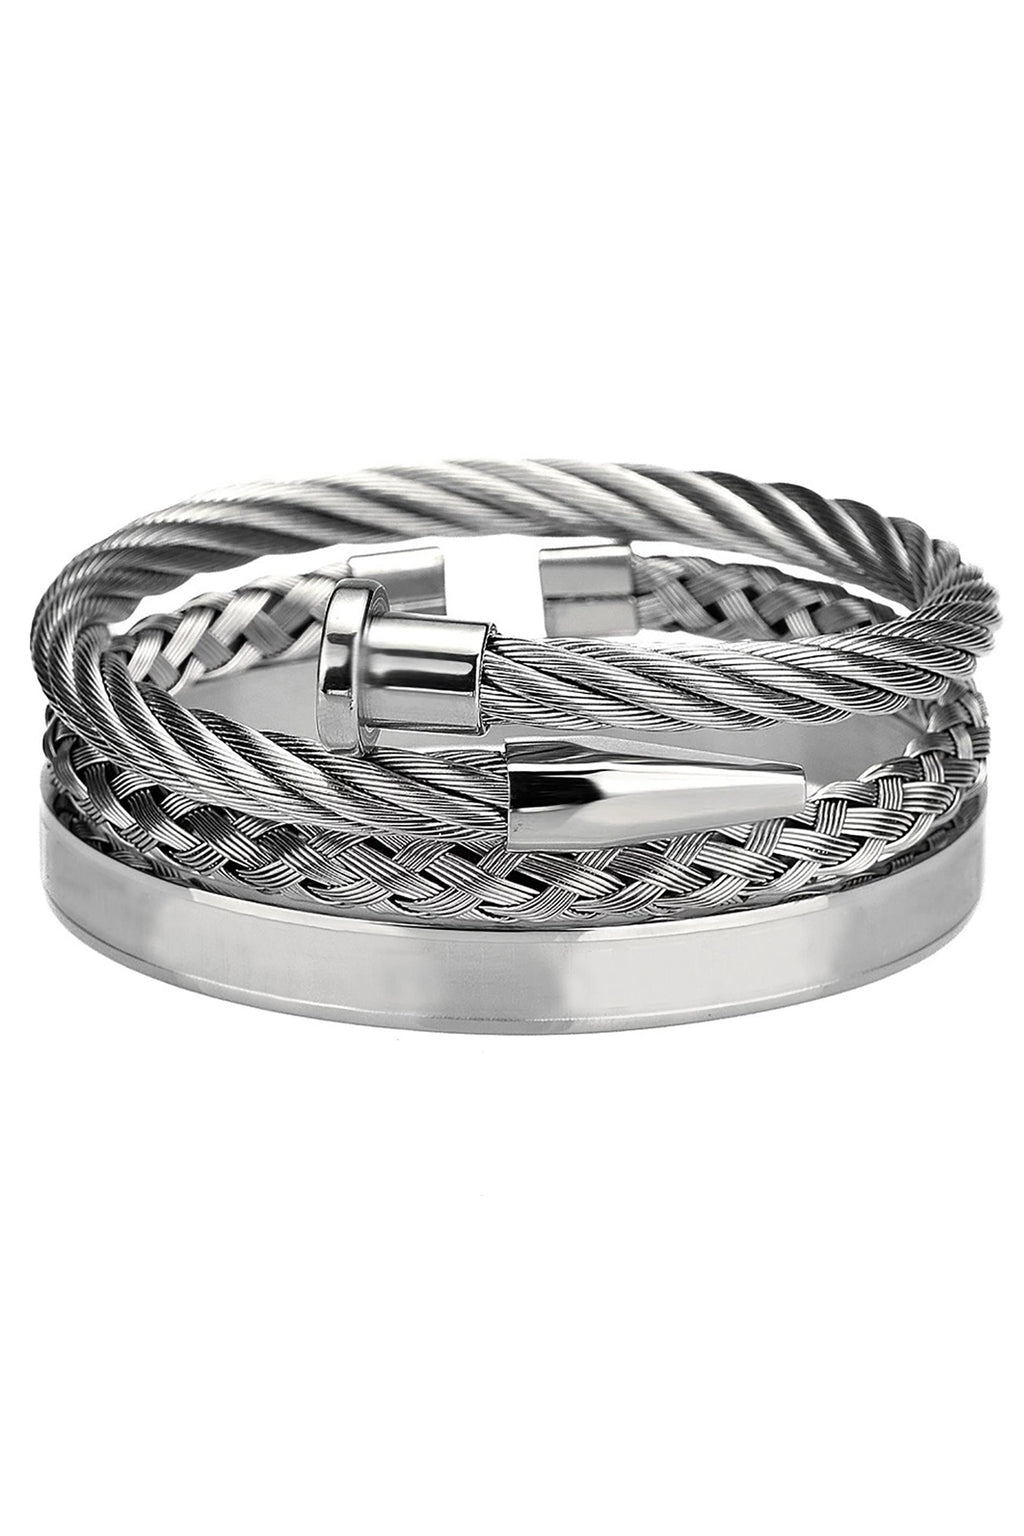 Mason Silver Tone Bracelet Set: Add a Touch of Sleek Elegance to Your Look with This Contemporary Collection.